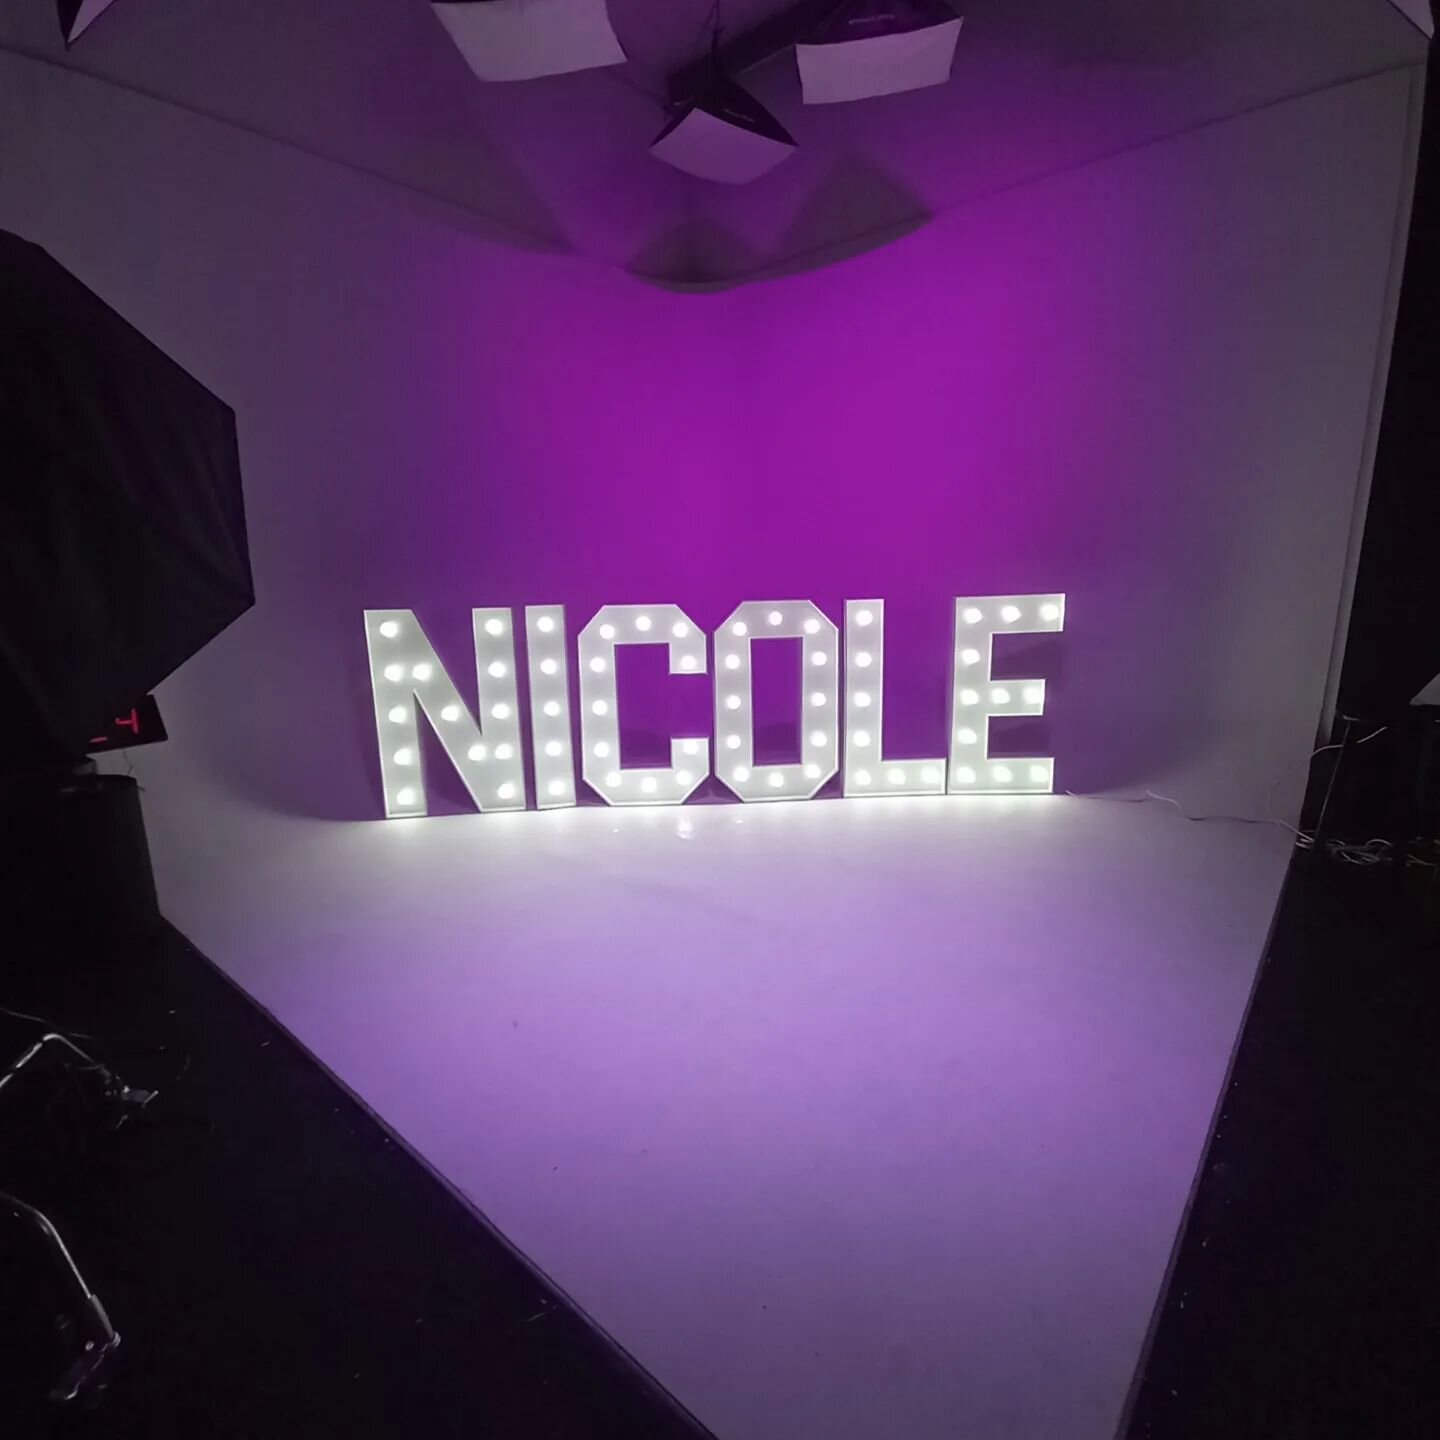 🙌🏾 NICOLE! 🙌🏾This is you sign that you should definitely put your name in lights! 🔥🙃

Venue: @1xstudiosclt

#qclights #marqueeletters #marqueeletterlights #ncevents  #cltevents #charlottesgotalot